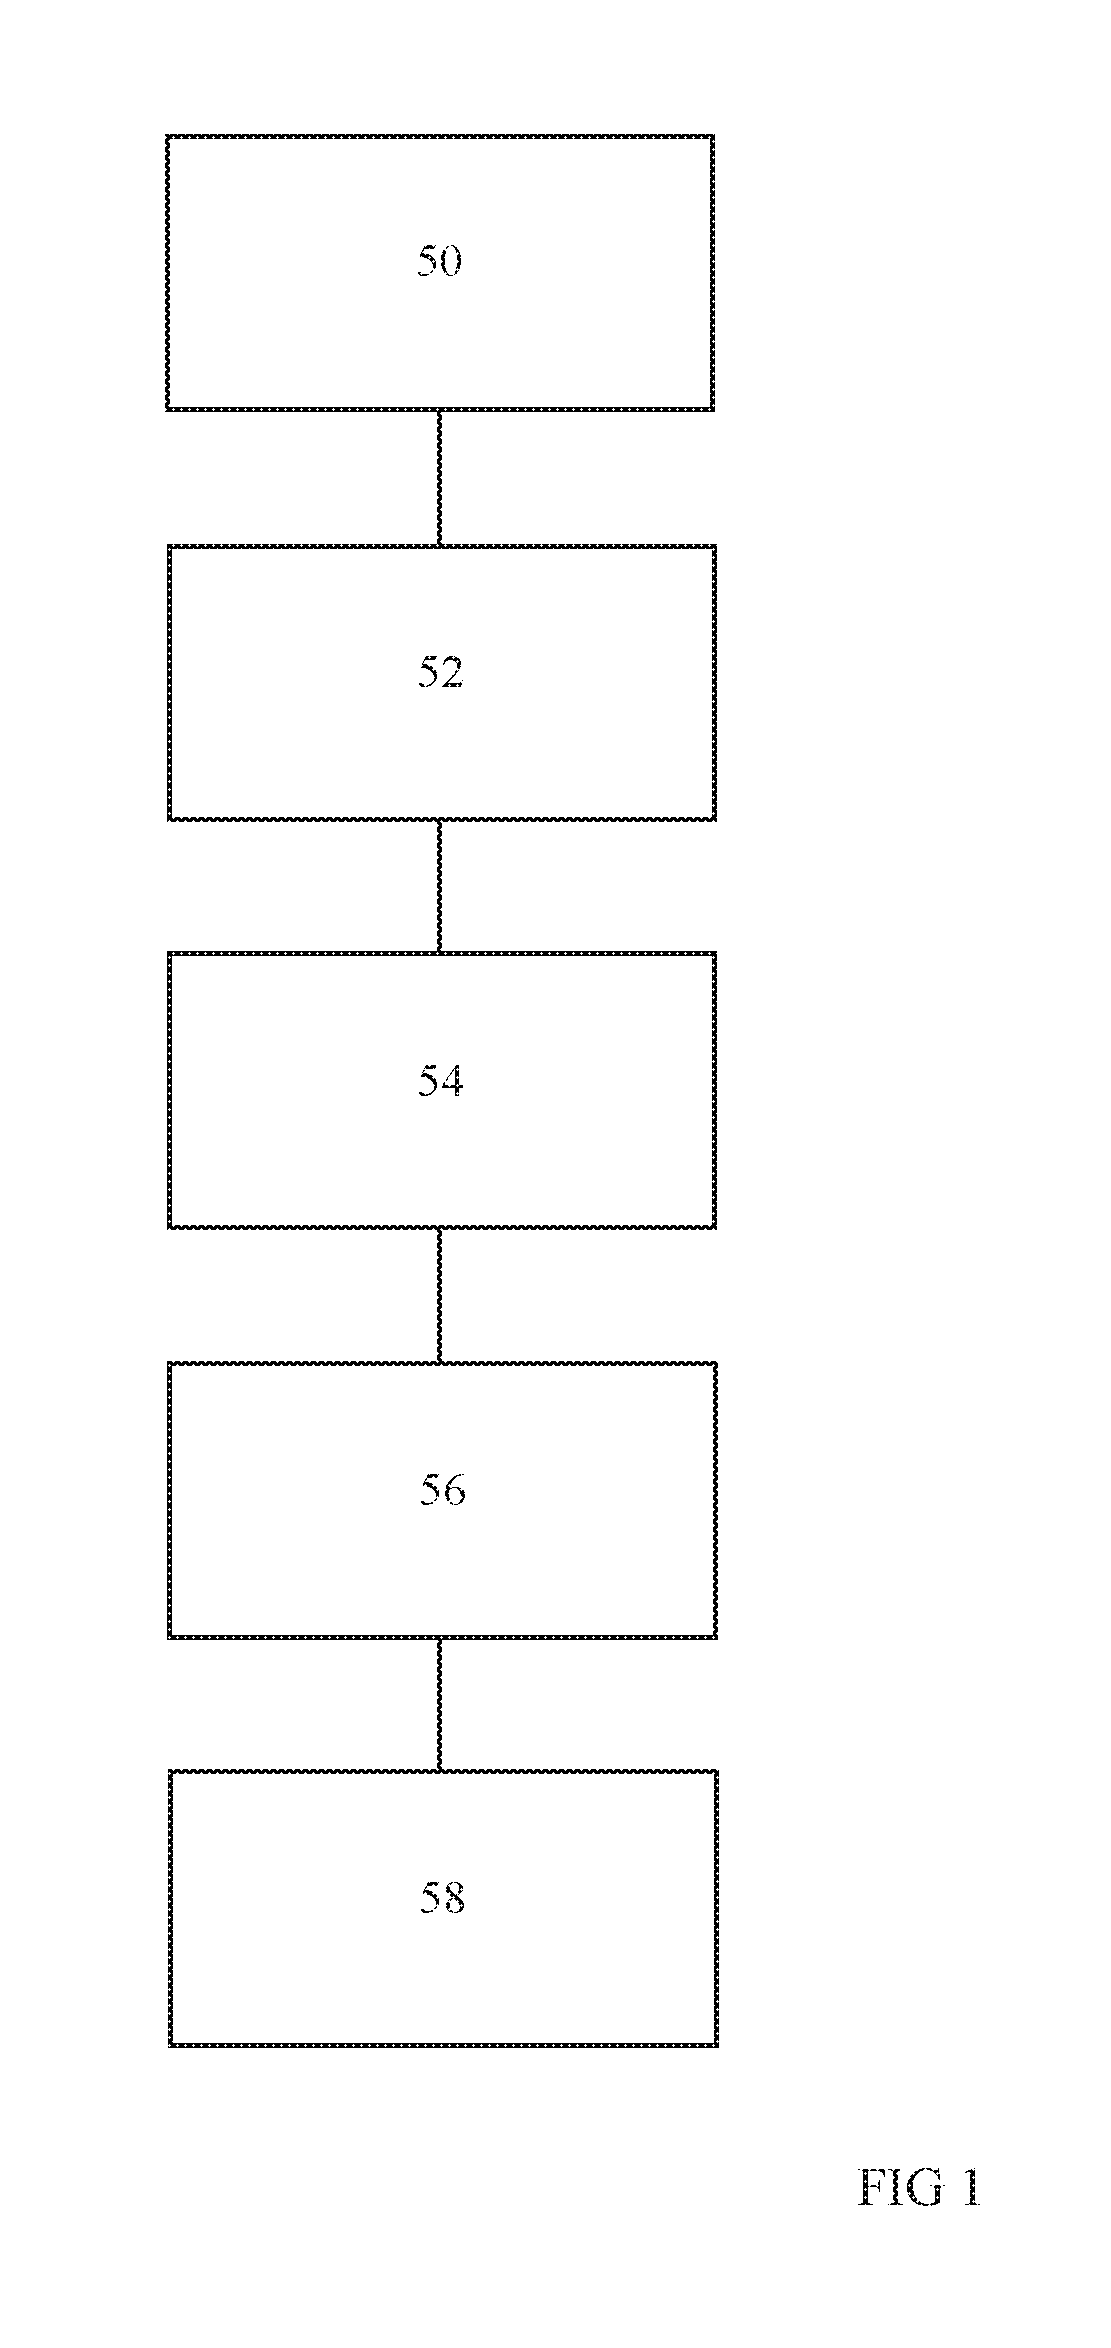 Wireless medical body area network and method to associate wireless devices therewith